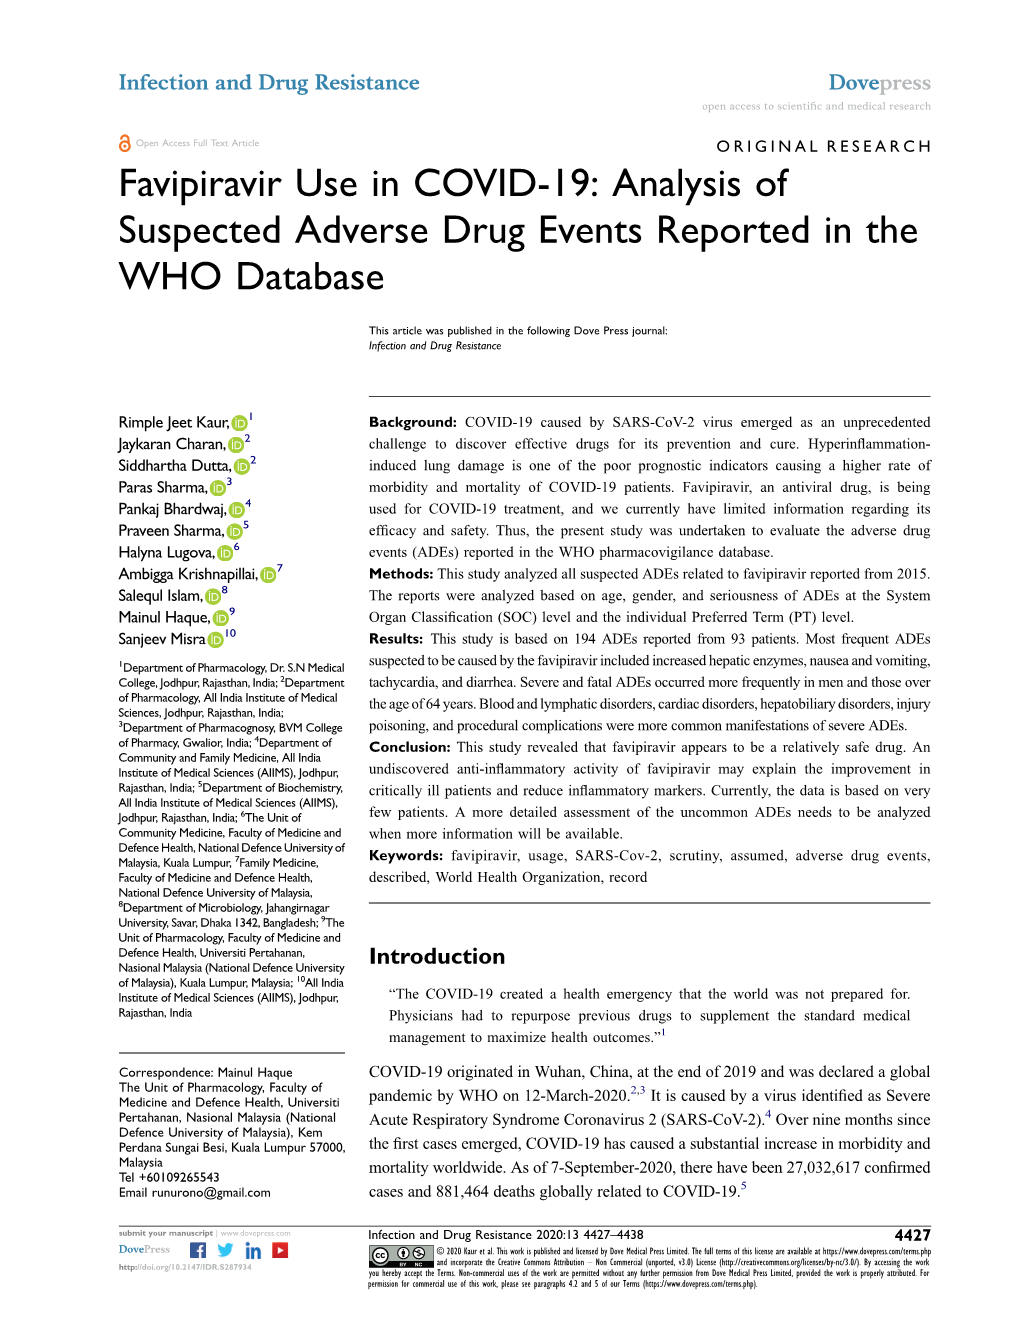 Favipiravir Use in COVID-19: Analysis of Suspected Adverse Drug Events Reported in the WHO Database